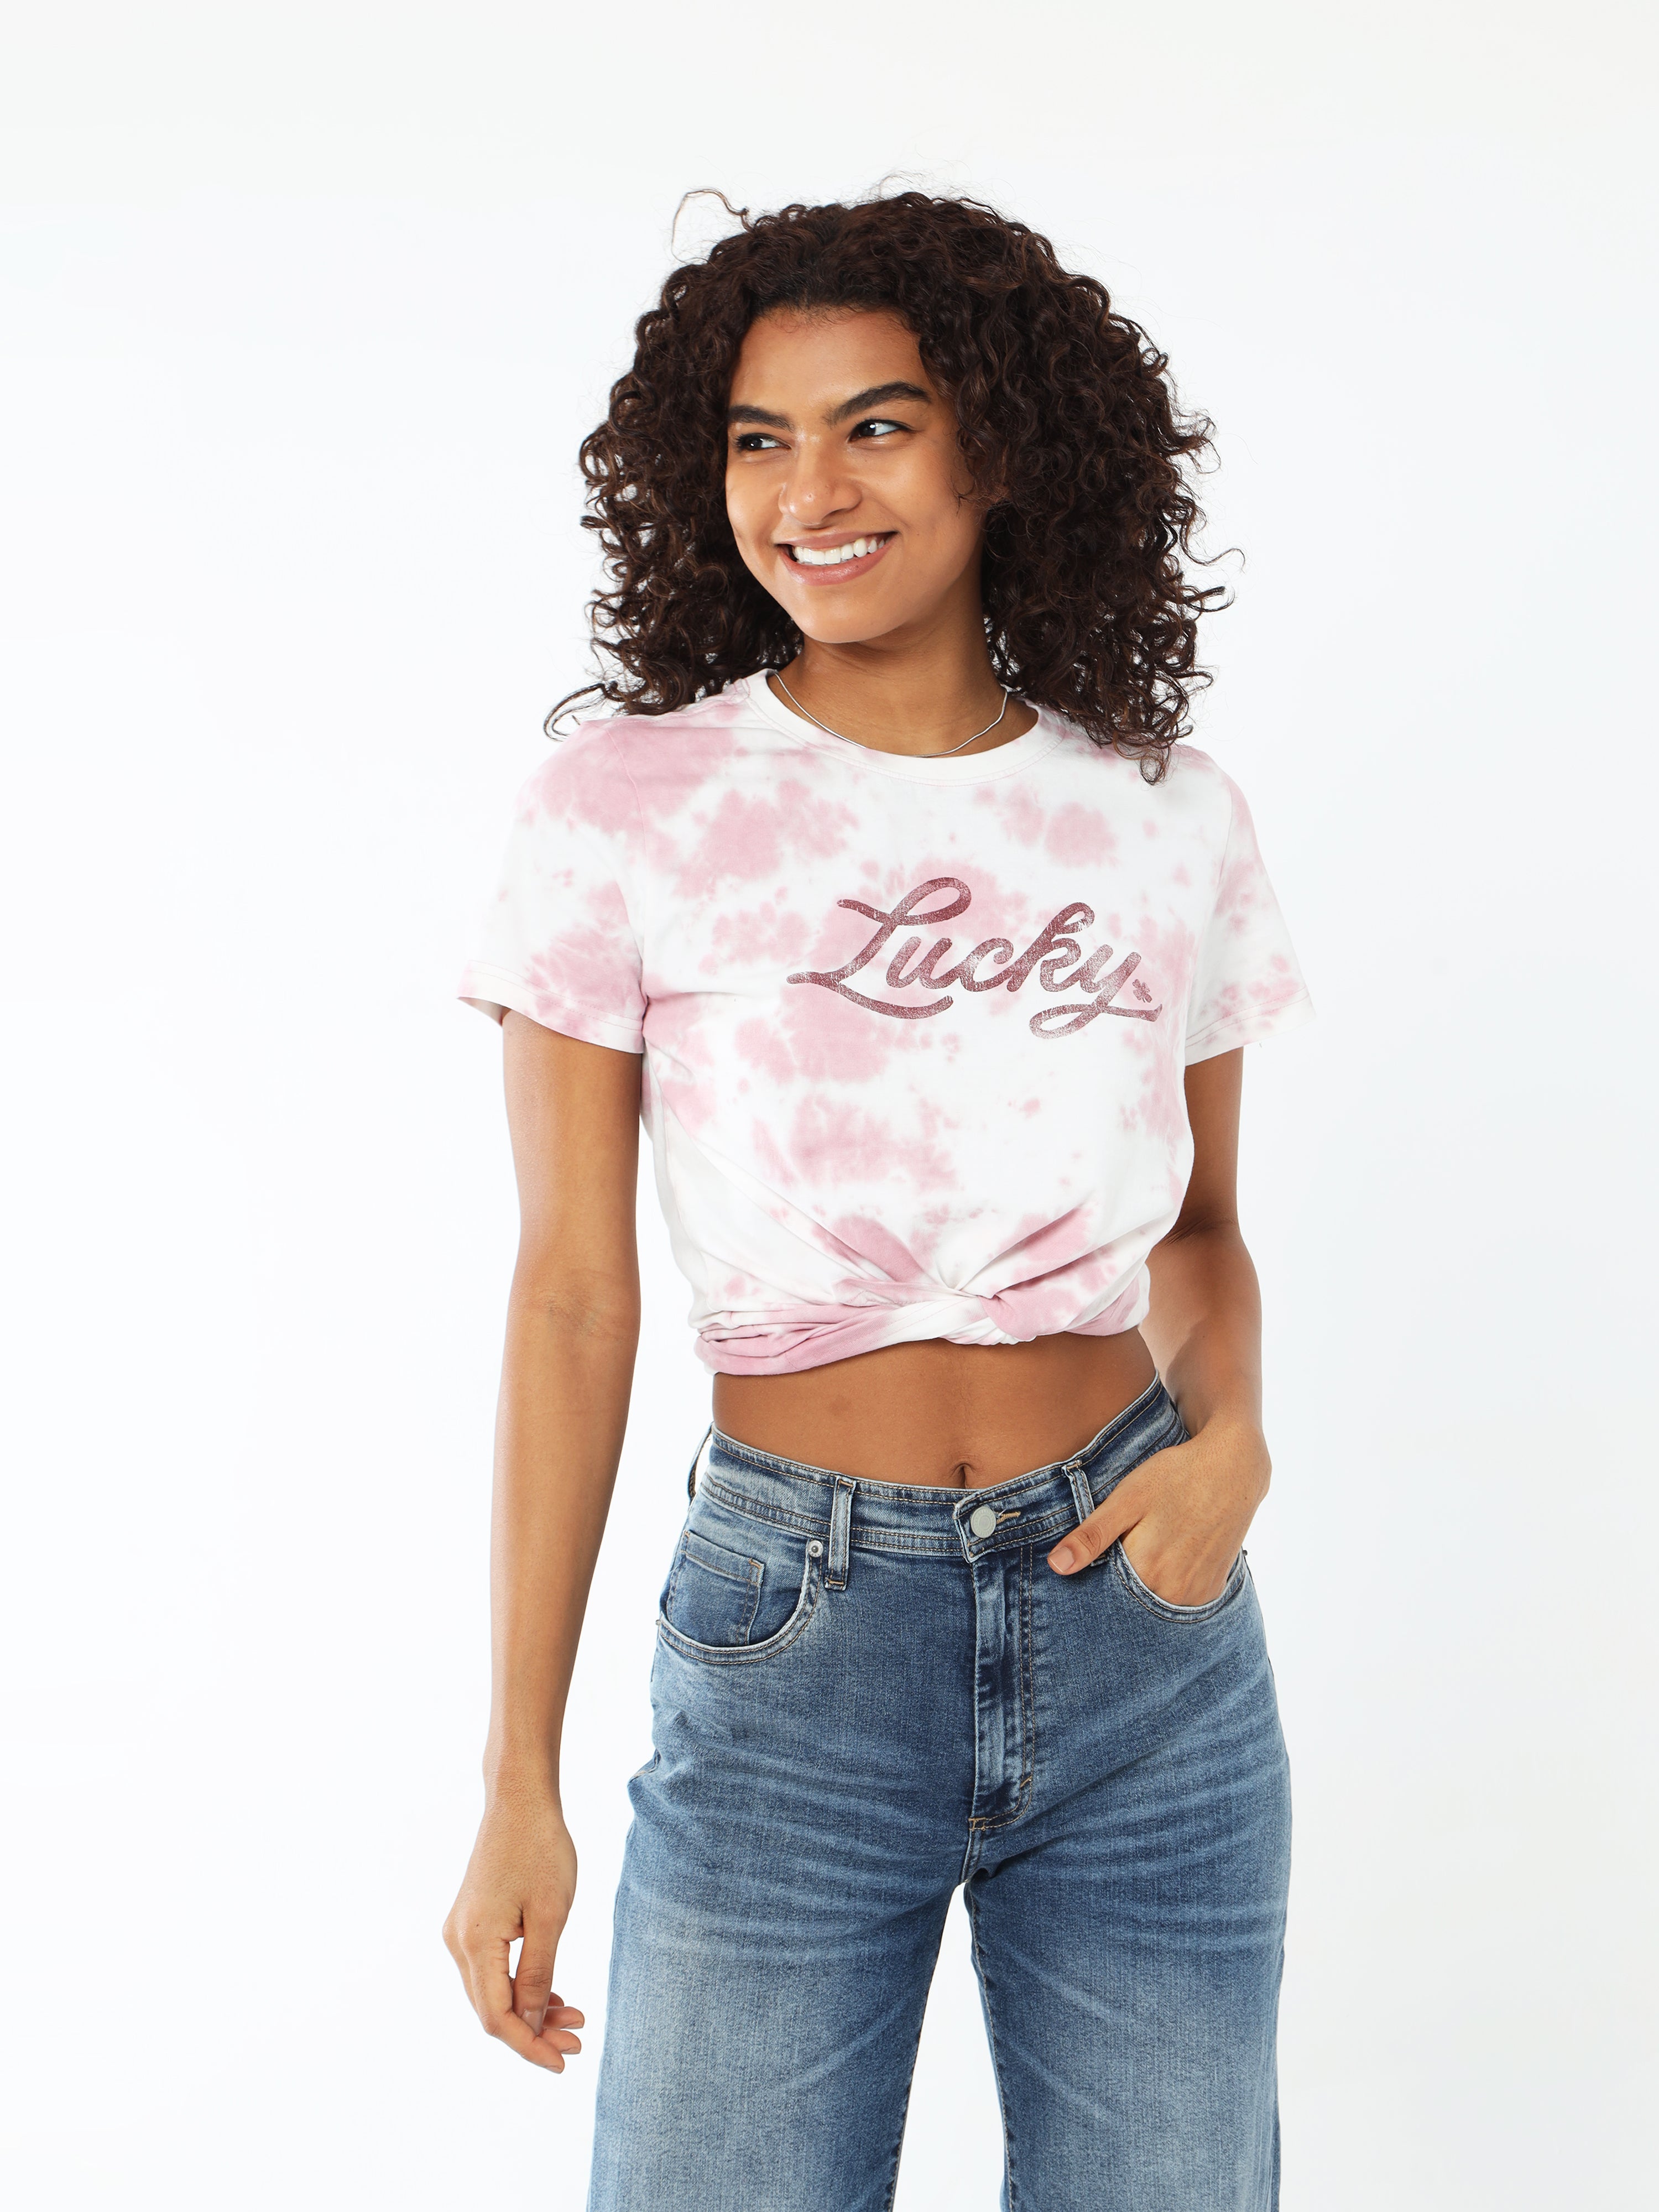 Women's Cropped Tie-Dye T-Shirt: Trendy and Chic